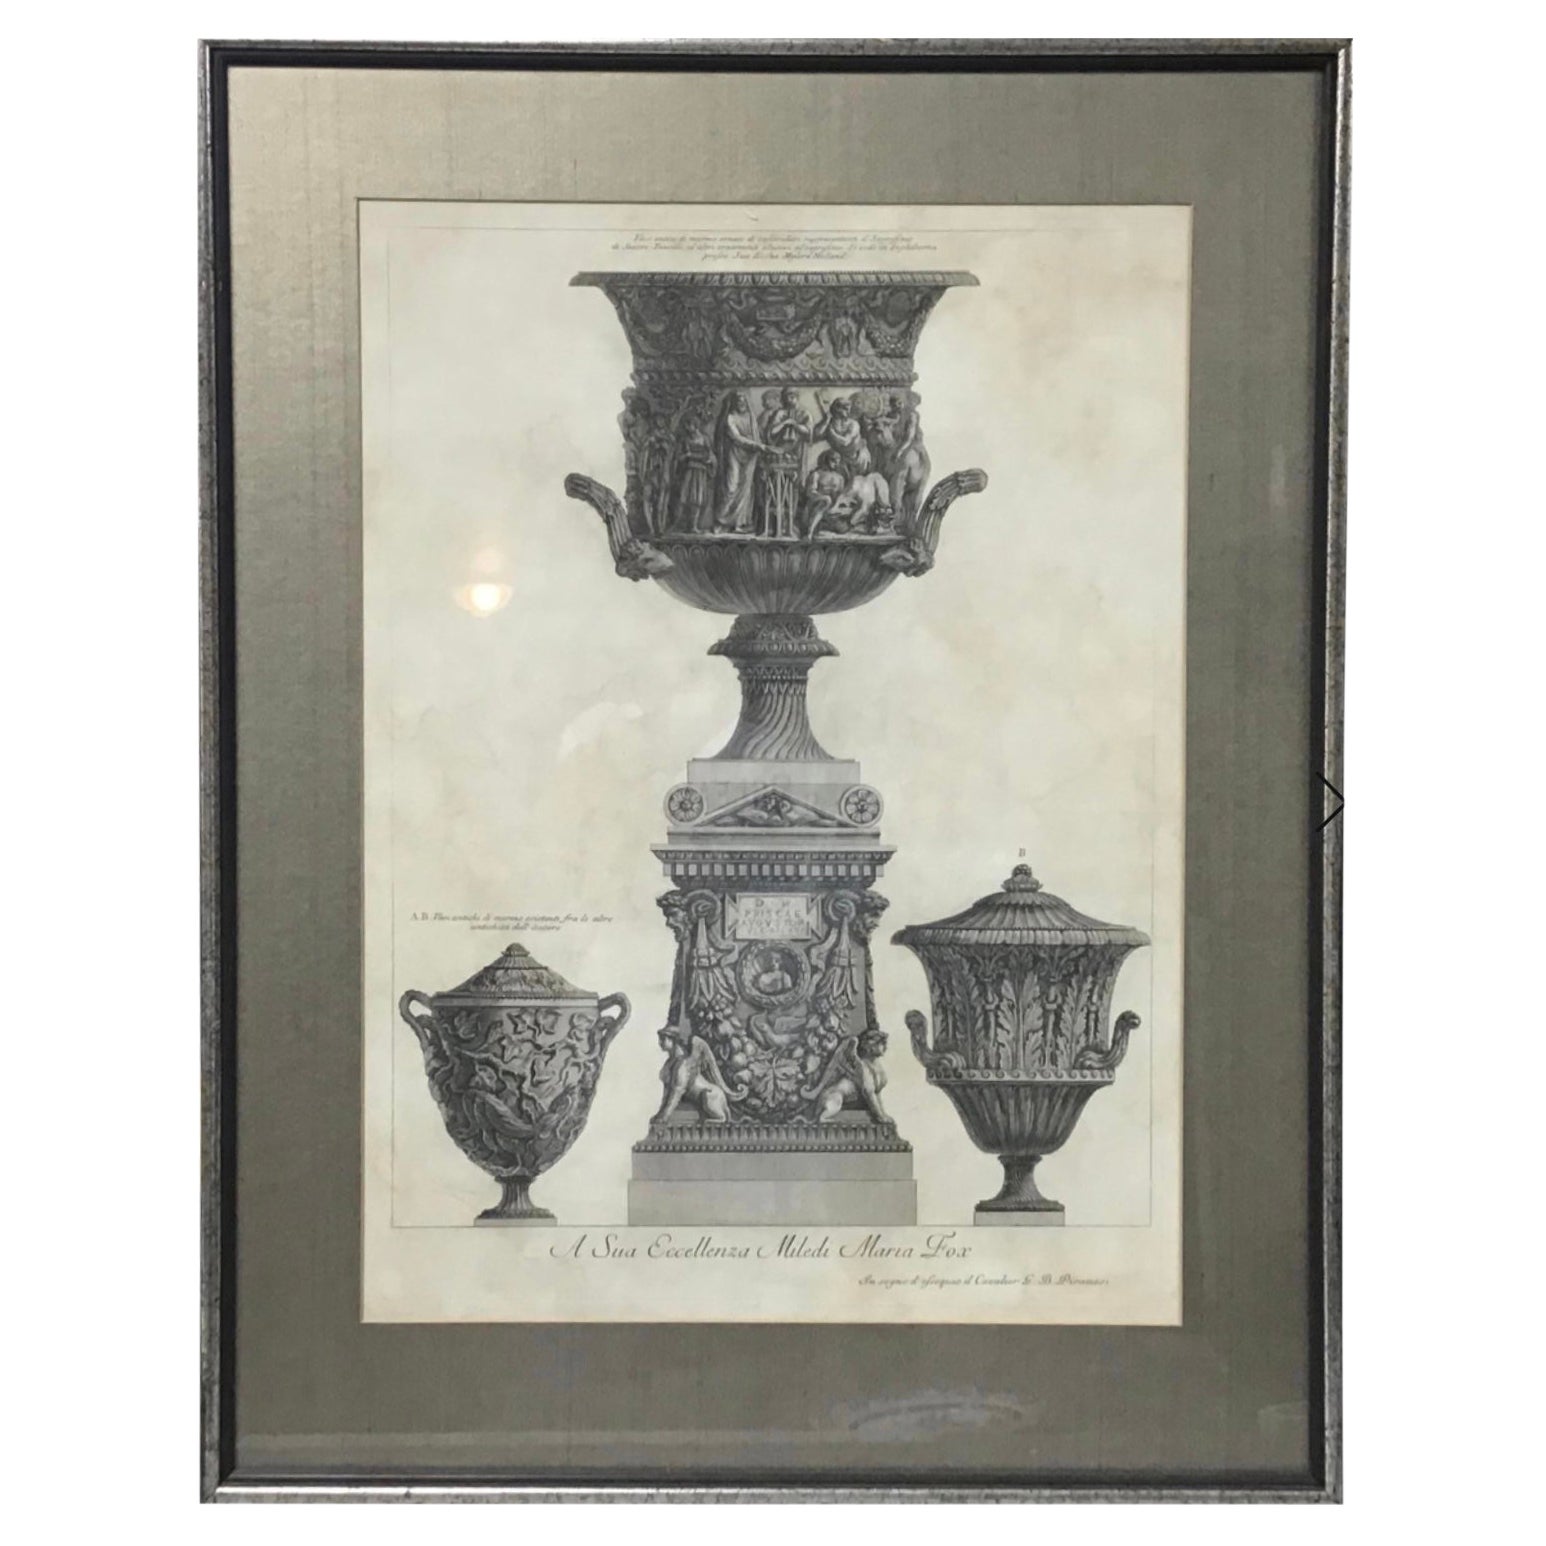 Three Marble Vases and a Sarcophagus, Etching by G.B. Piranesi